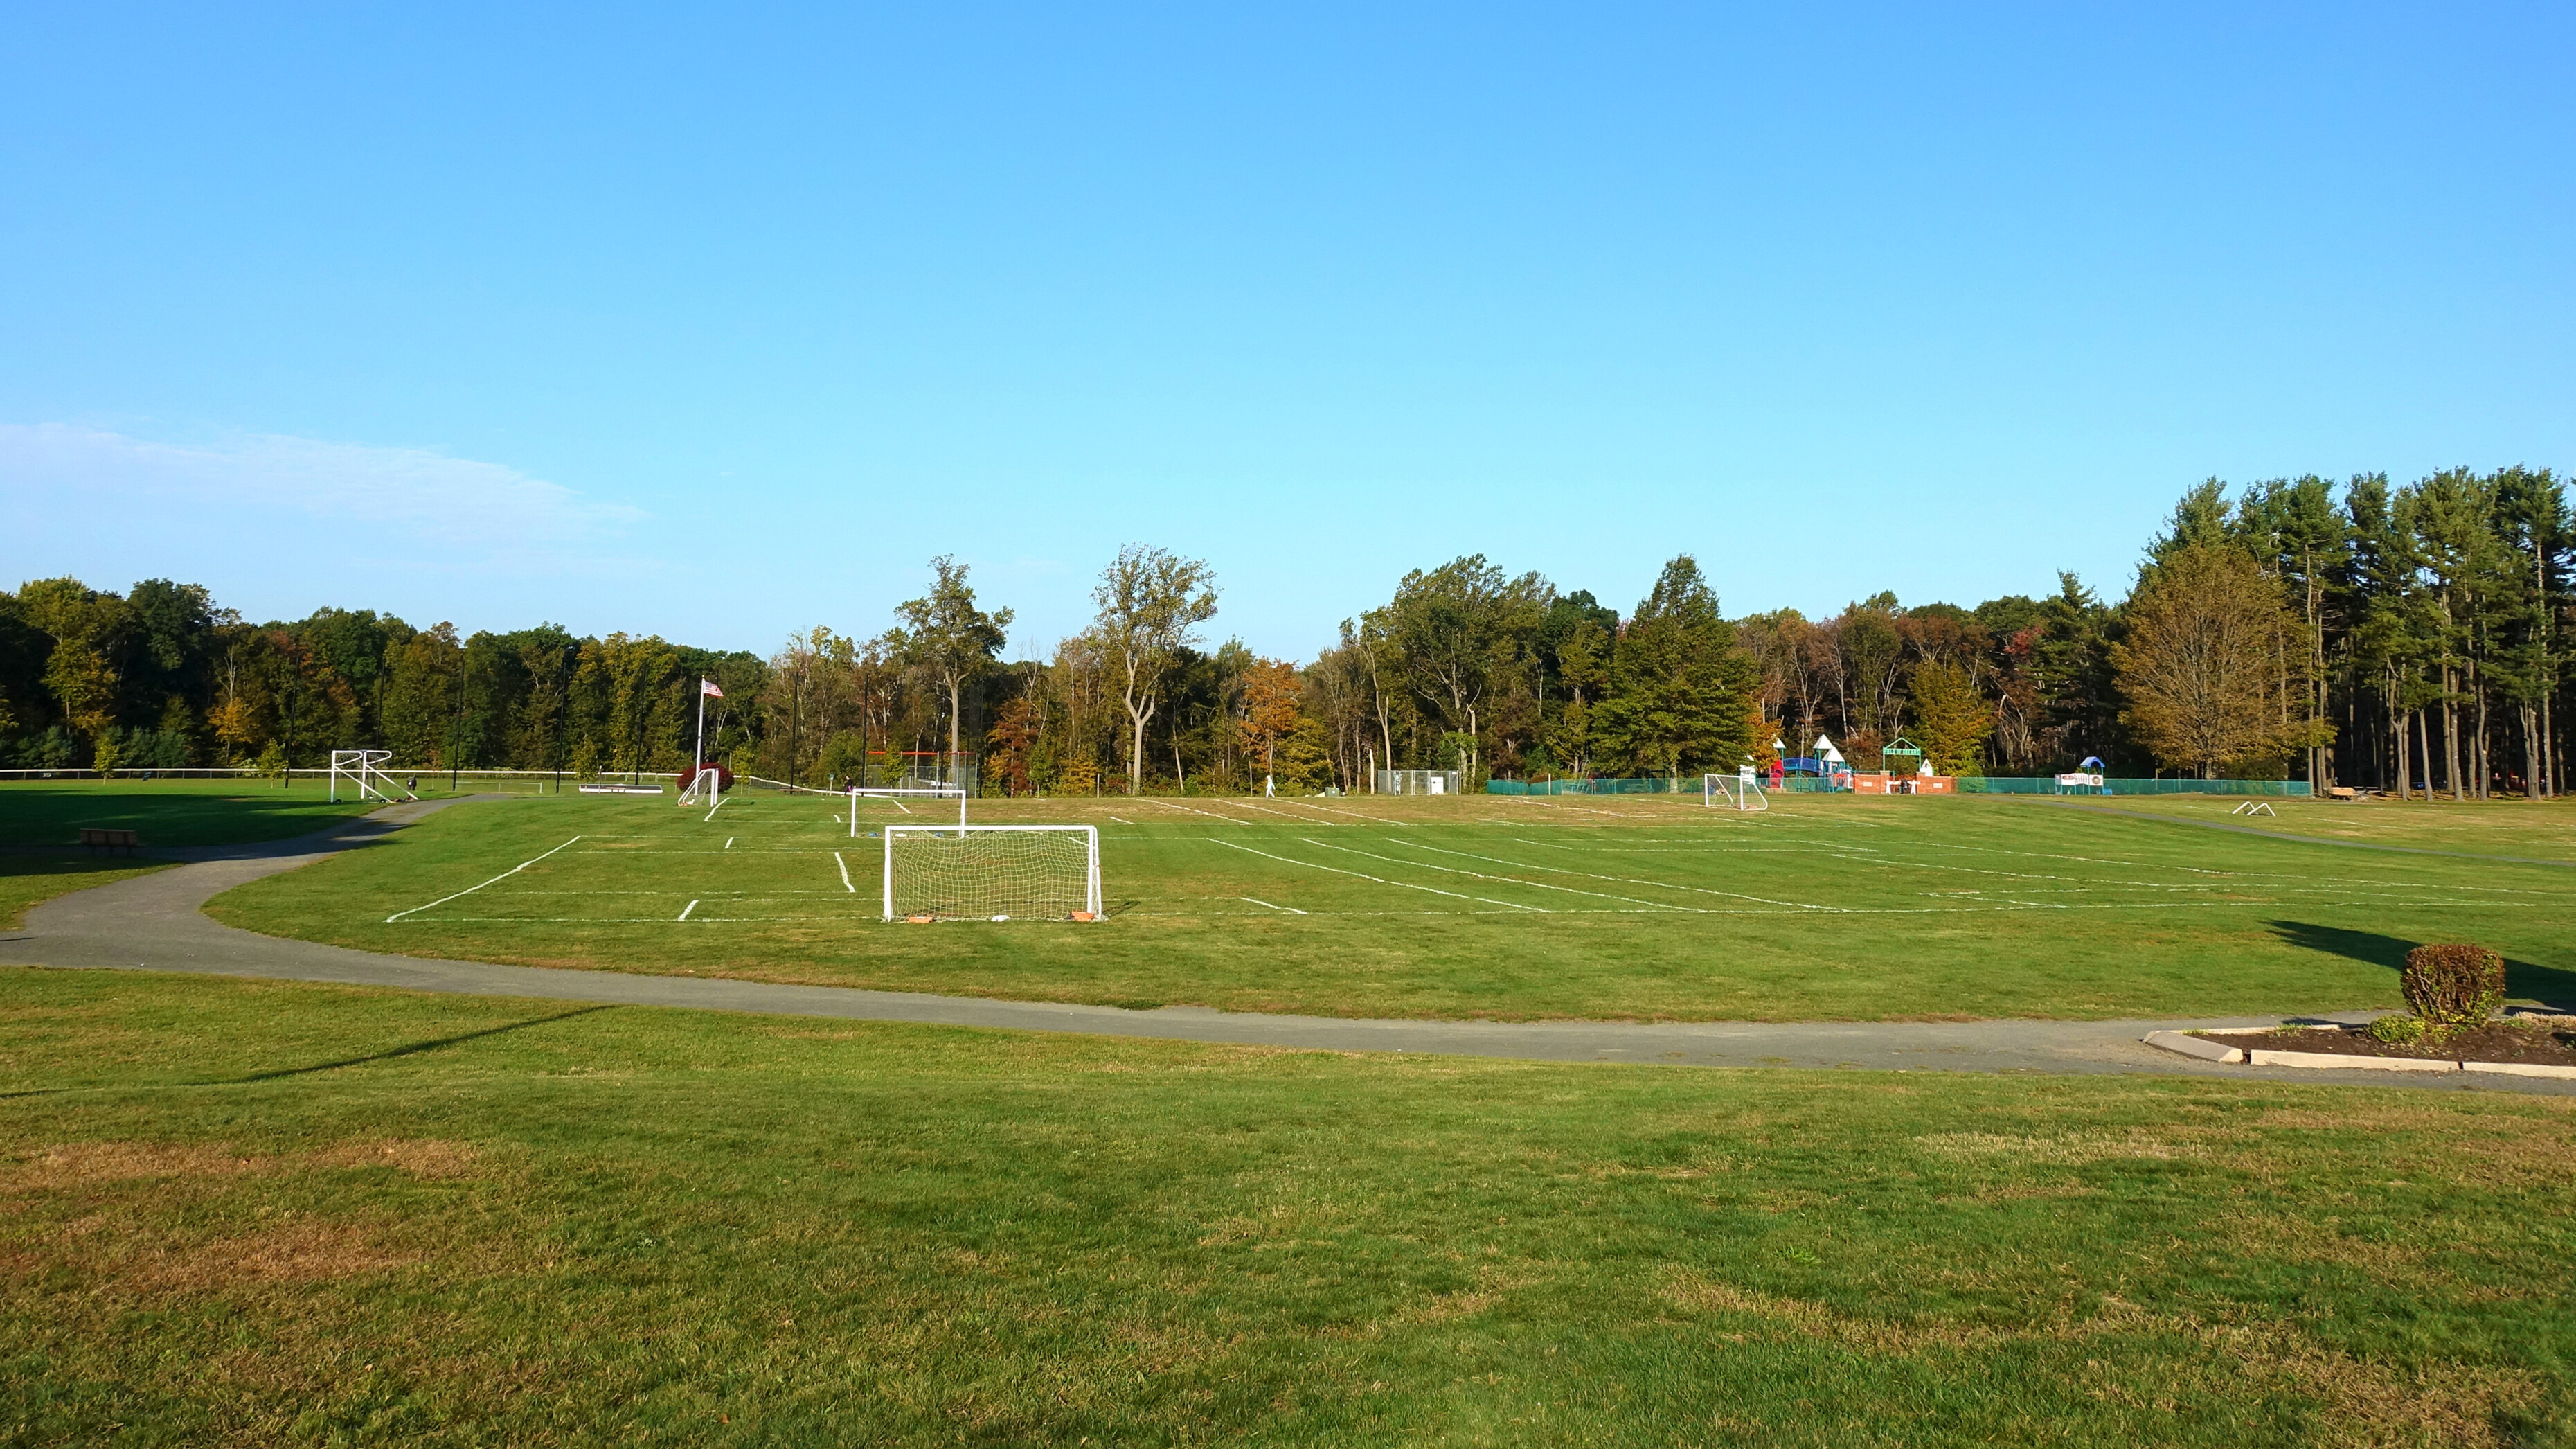 Soccer fields and walking path at Hotchkiss Field park in Prospect, CT